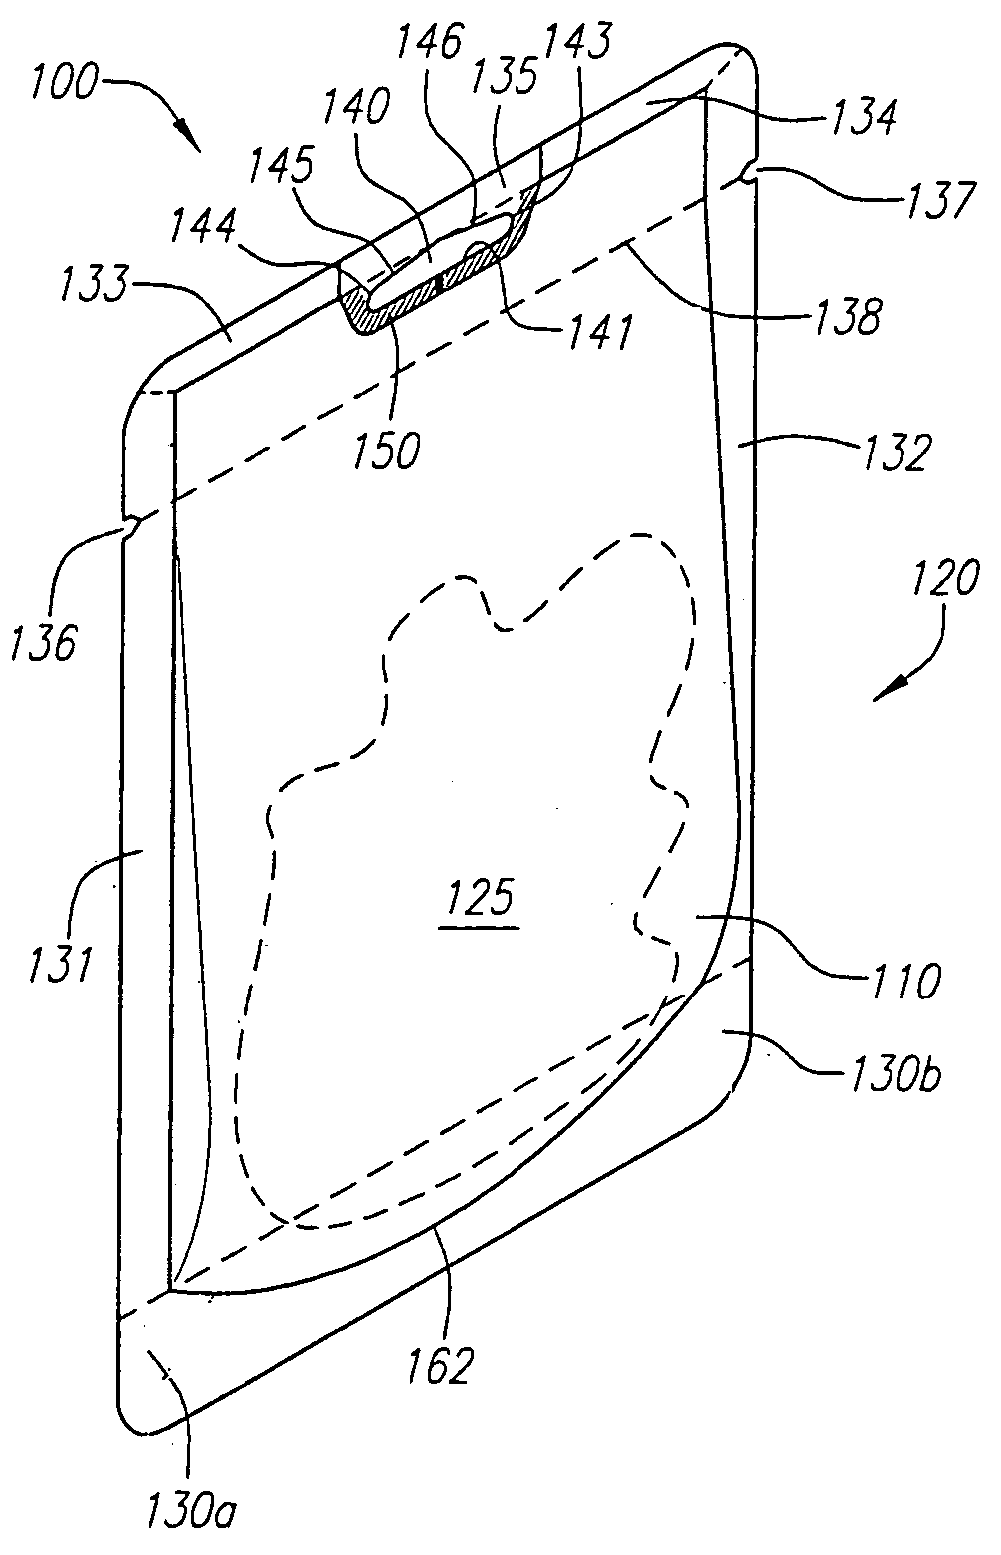 Self-venting microwaveable pouch, food item, and method of preparation